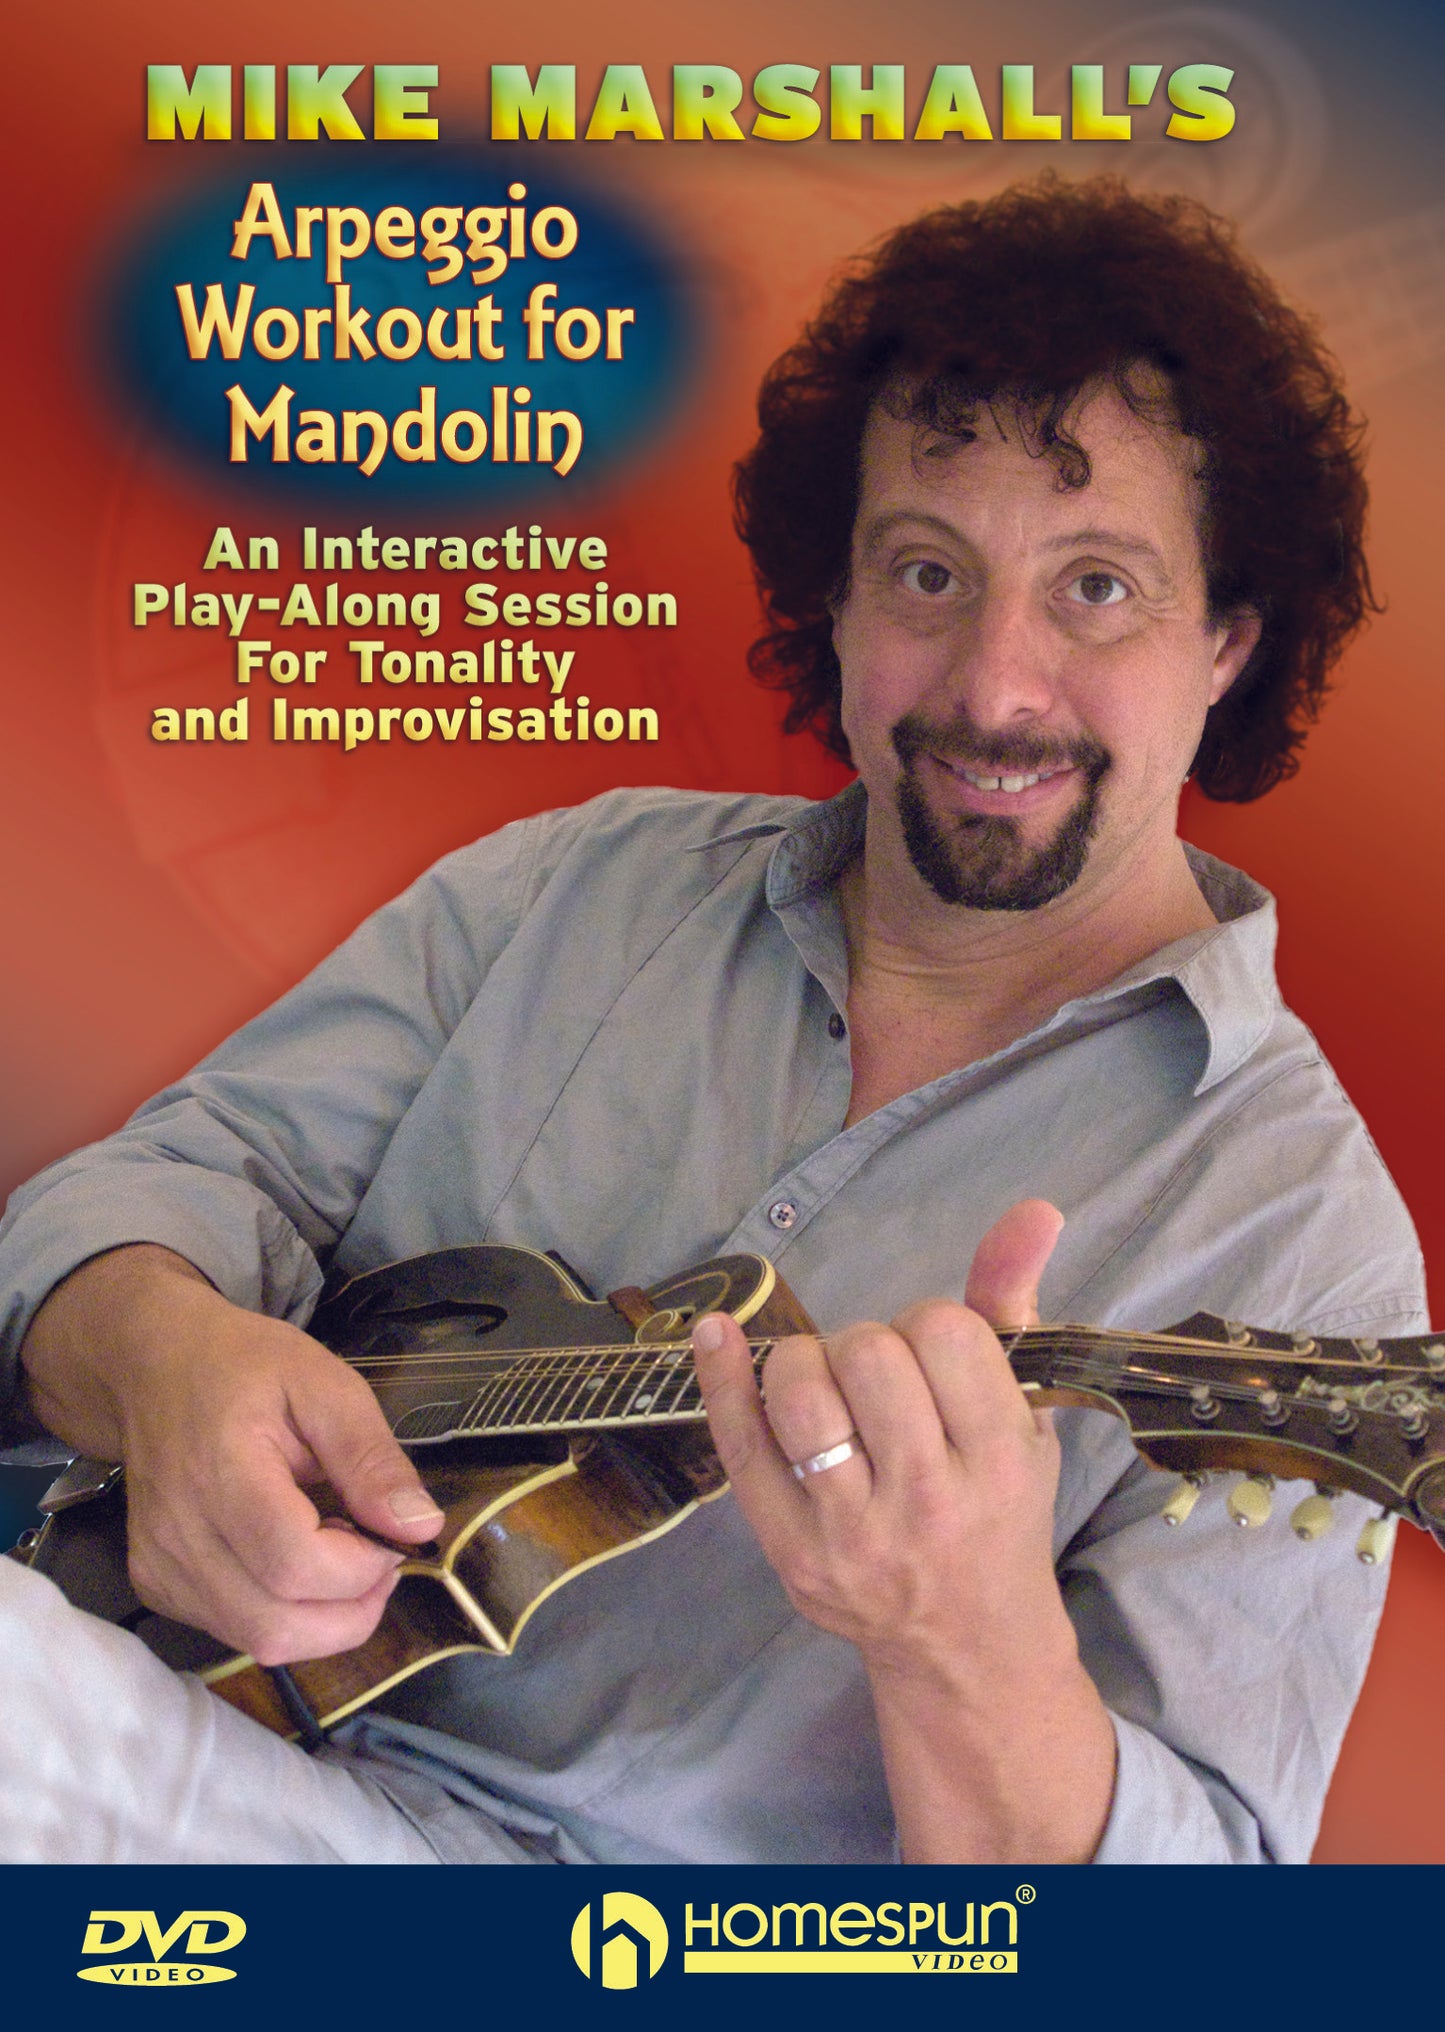 Image 1 of DOWNLOAD ONLY - Mike Marshall's Arpeggio Workout for Mandolin-An Interactive Play-Along Session - SKU# 300-DVD400 : Product Type Media : Elderly Instruments